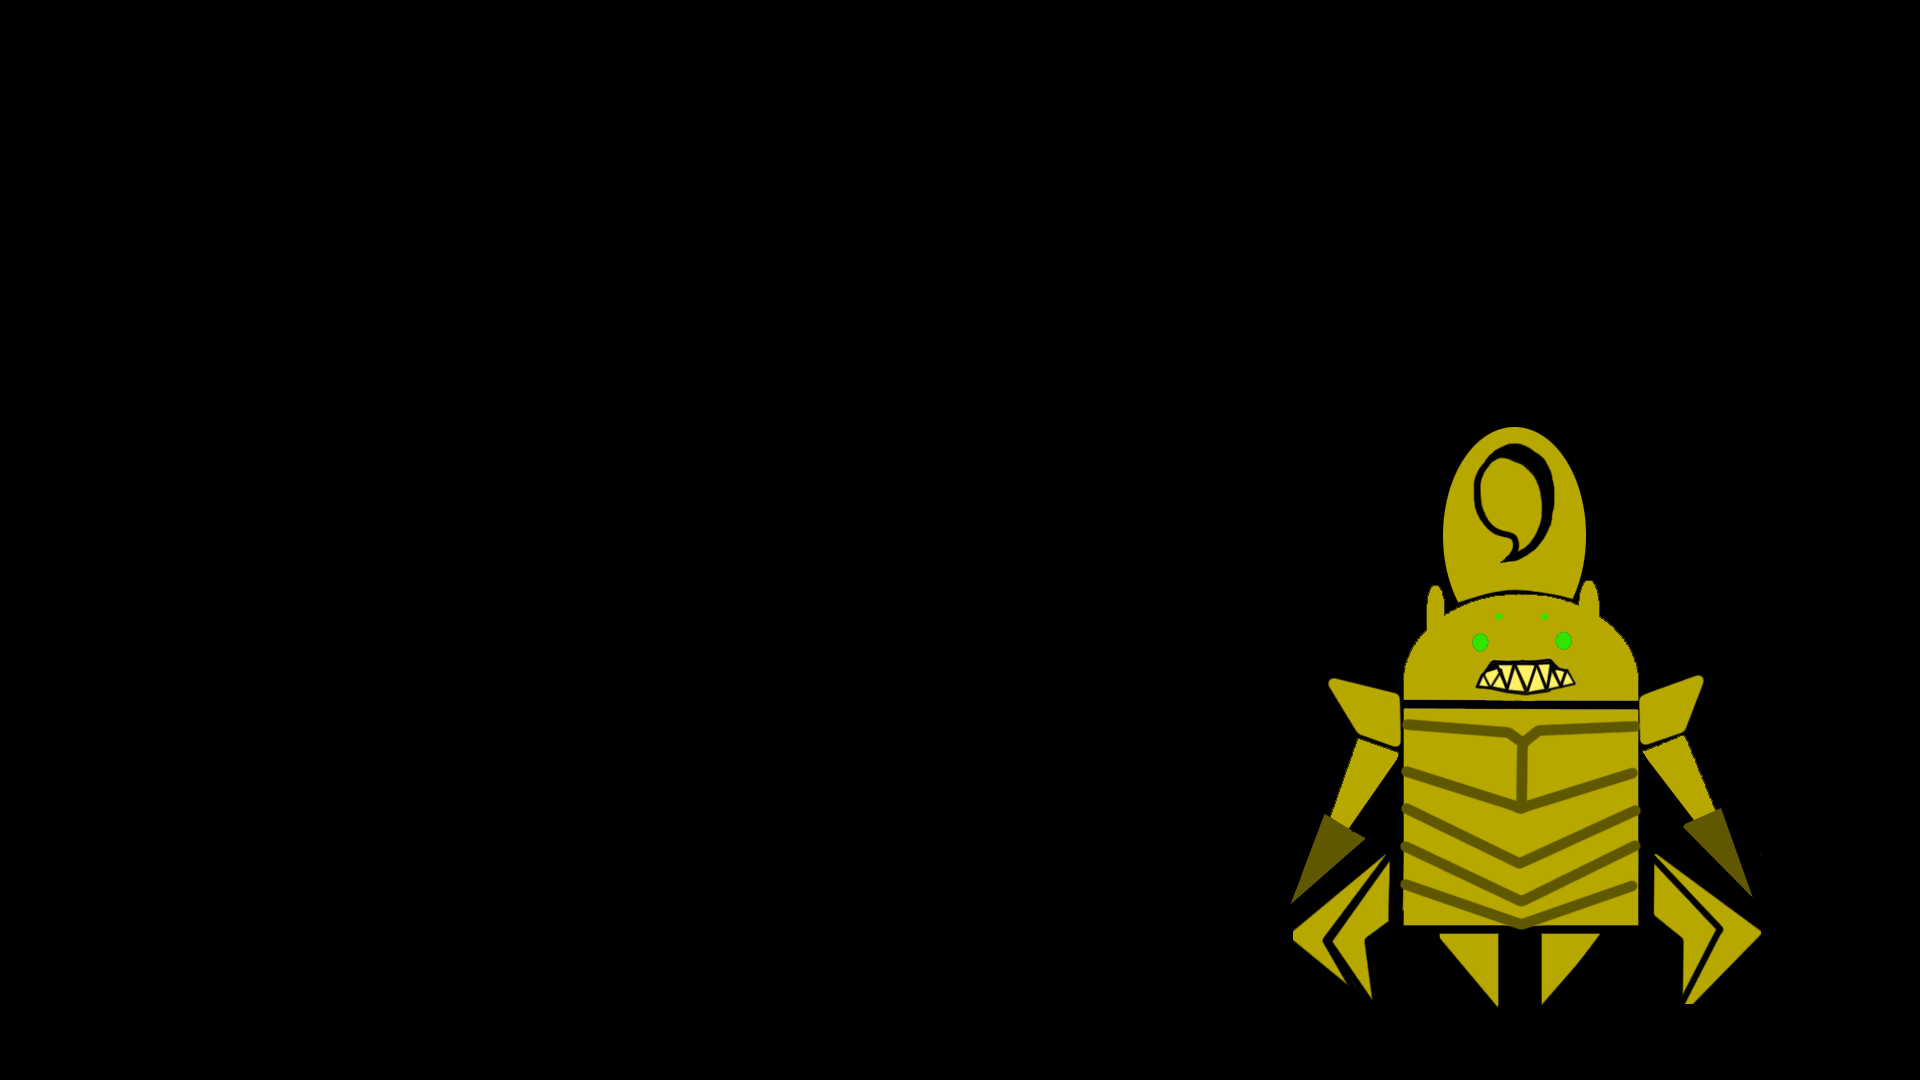 General 1920x1080 Android (operating system) Microsoft Windows Sand King Dota 2 androidify digital art simple background